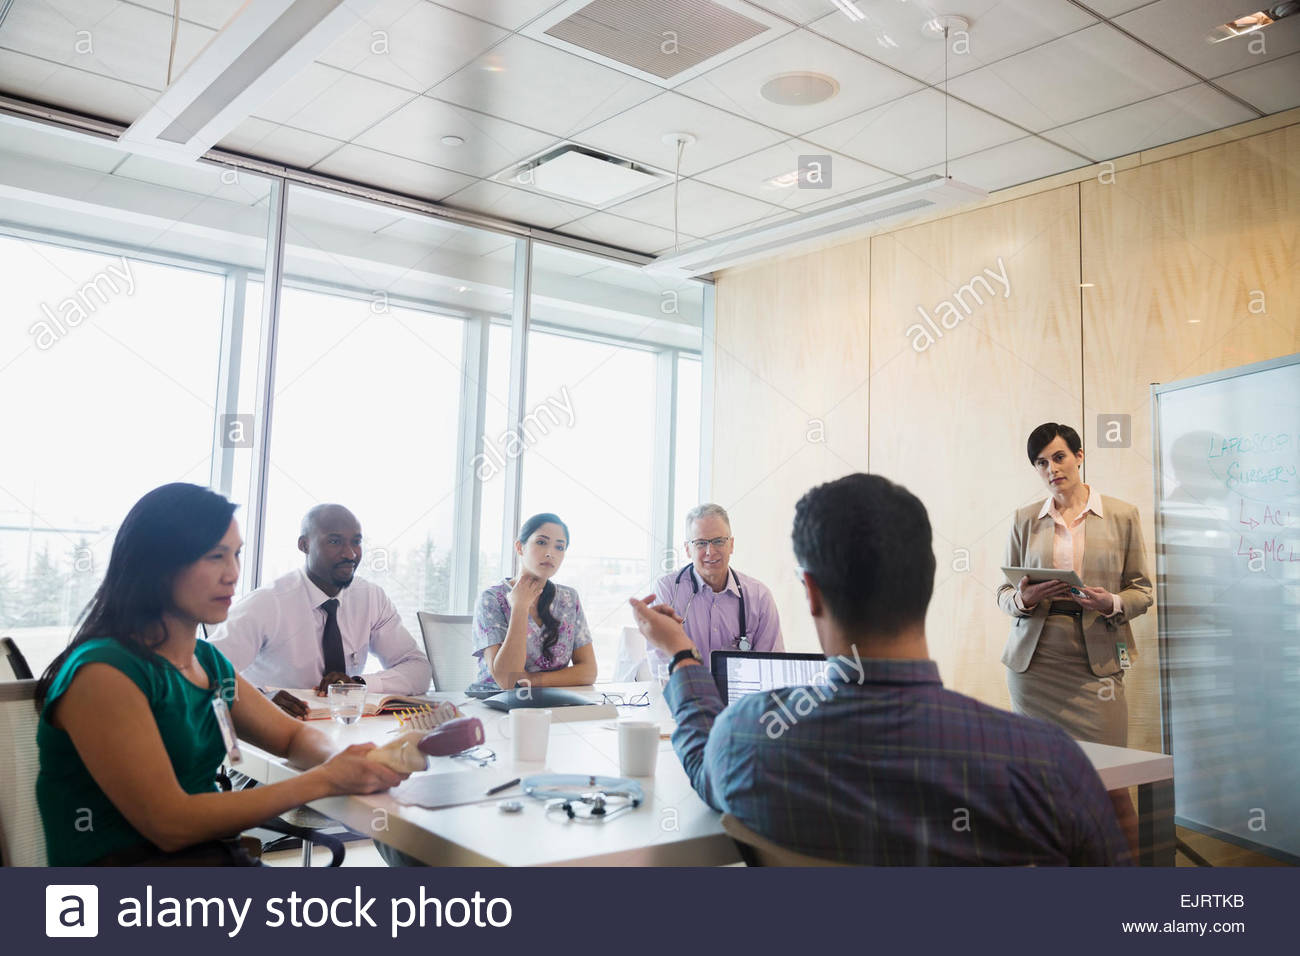 Administrator leading meeting in hospital conference room Stock Photo